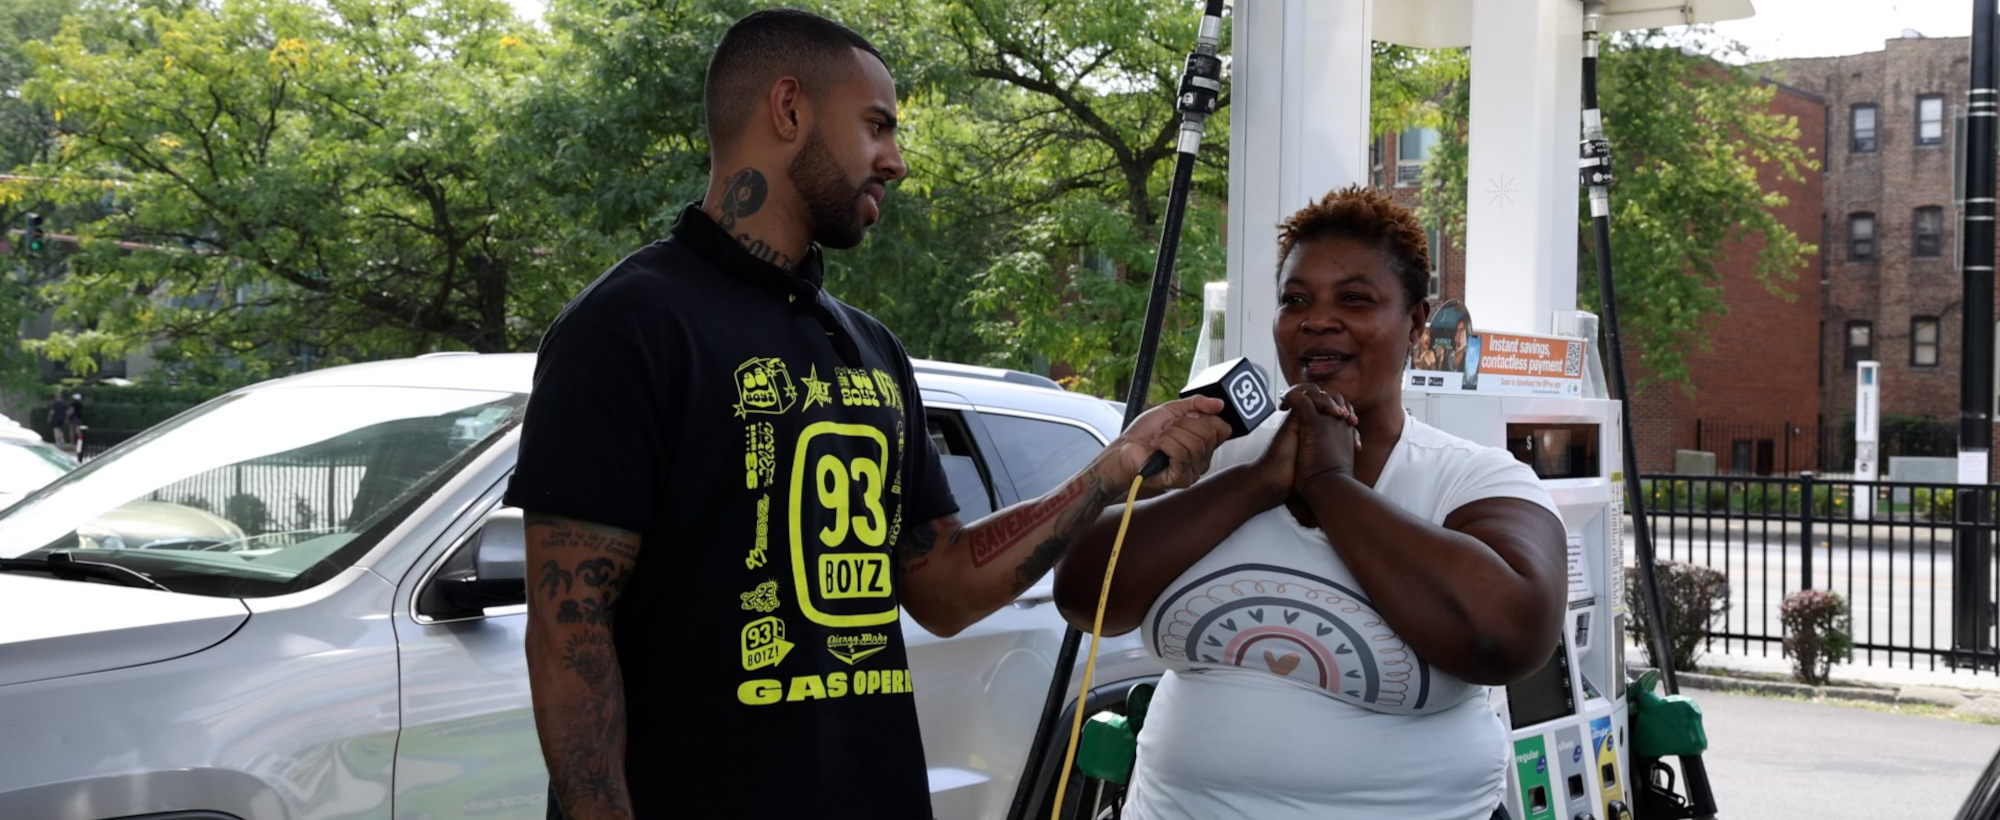 Vic Mensa Provides $10,000 in Free Gas to Drivers, Brings One Woman Near Tears